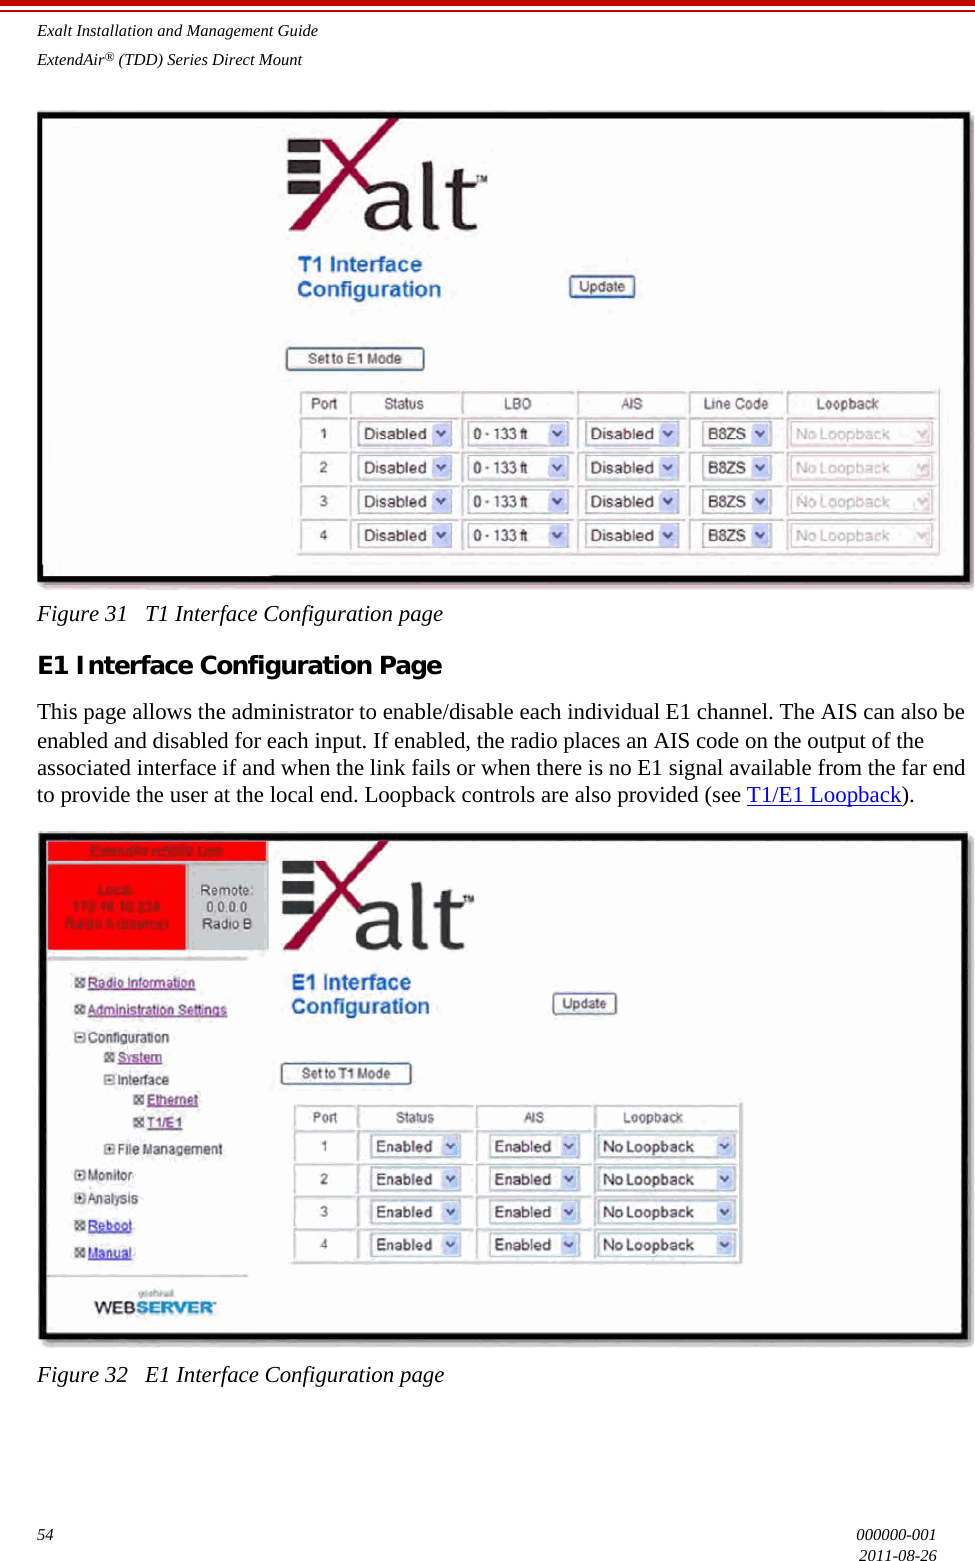 Exalt Installation and Management GuideExtendAir® (TDD) Series Direct Mount54 000000-0012011-08-26Figure 31   T1 Interface Configuration pageE1 Interface Configuration PageThis page allows the administrator to enable/disable each individual E1 channel. The AIS can also be enabled and disabled for each input. If enabled, the radio places an AIS code on the output of the associated interface if and when the link fails or when there is no E1 signal available from the far end to provide the user at the local end. Loopback controls are also provided (see T1/E1 Loopback).Figure 32   E1 Interface Configuration page